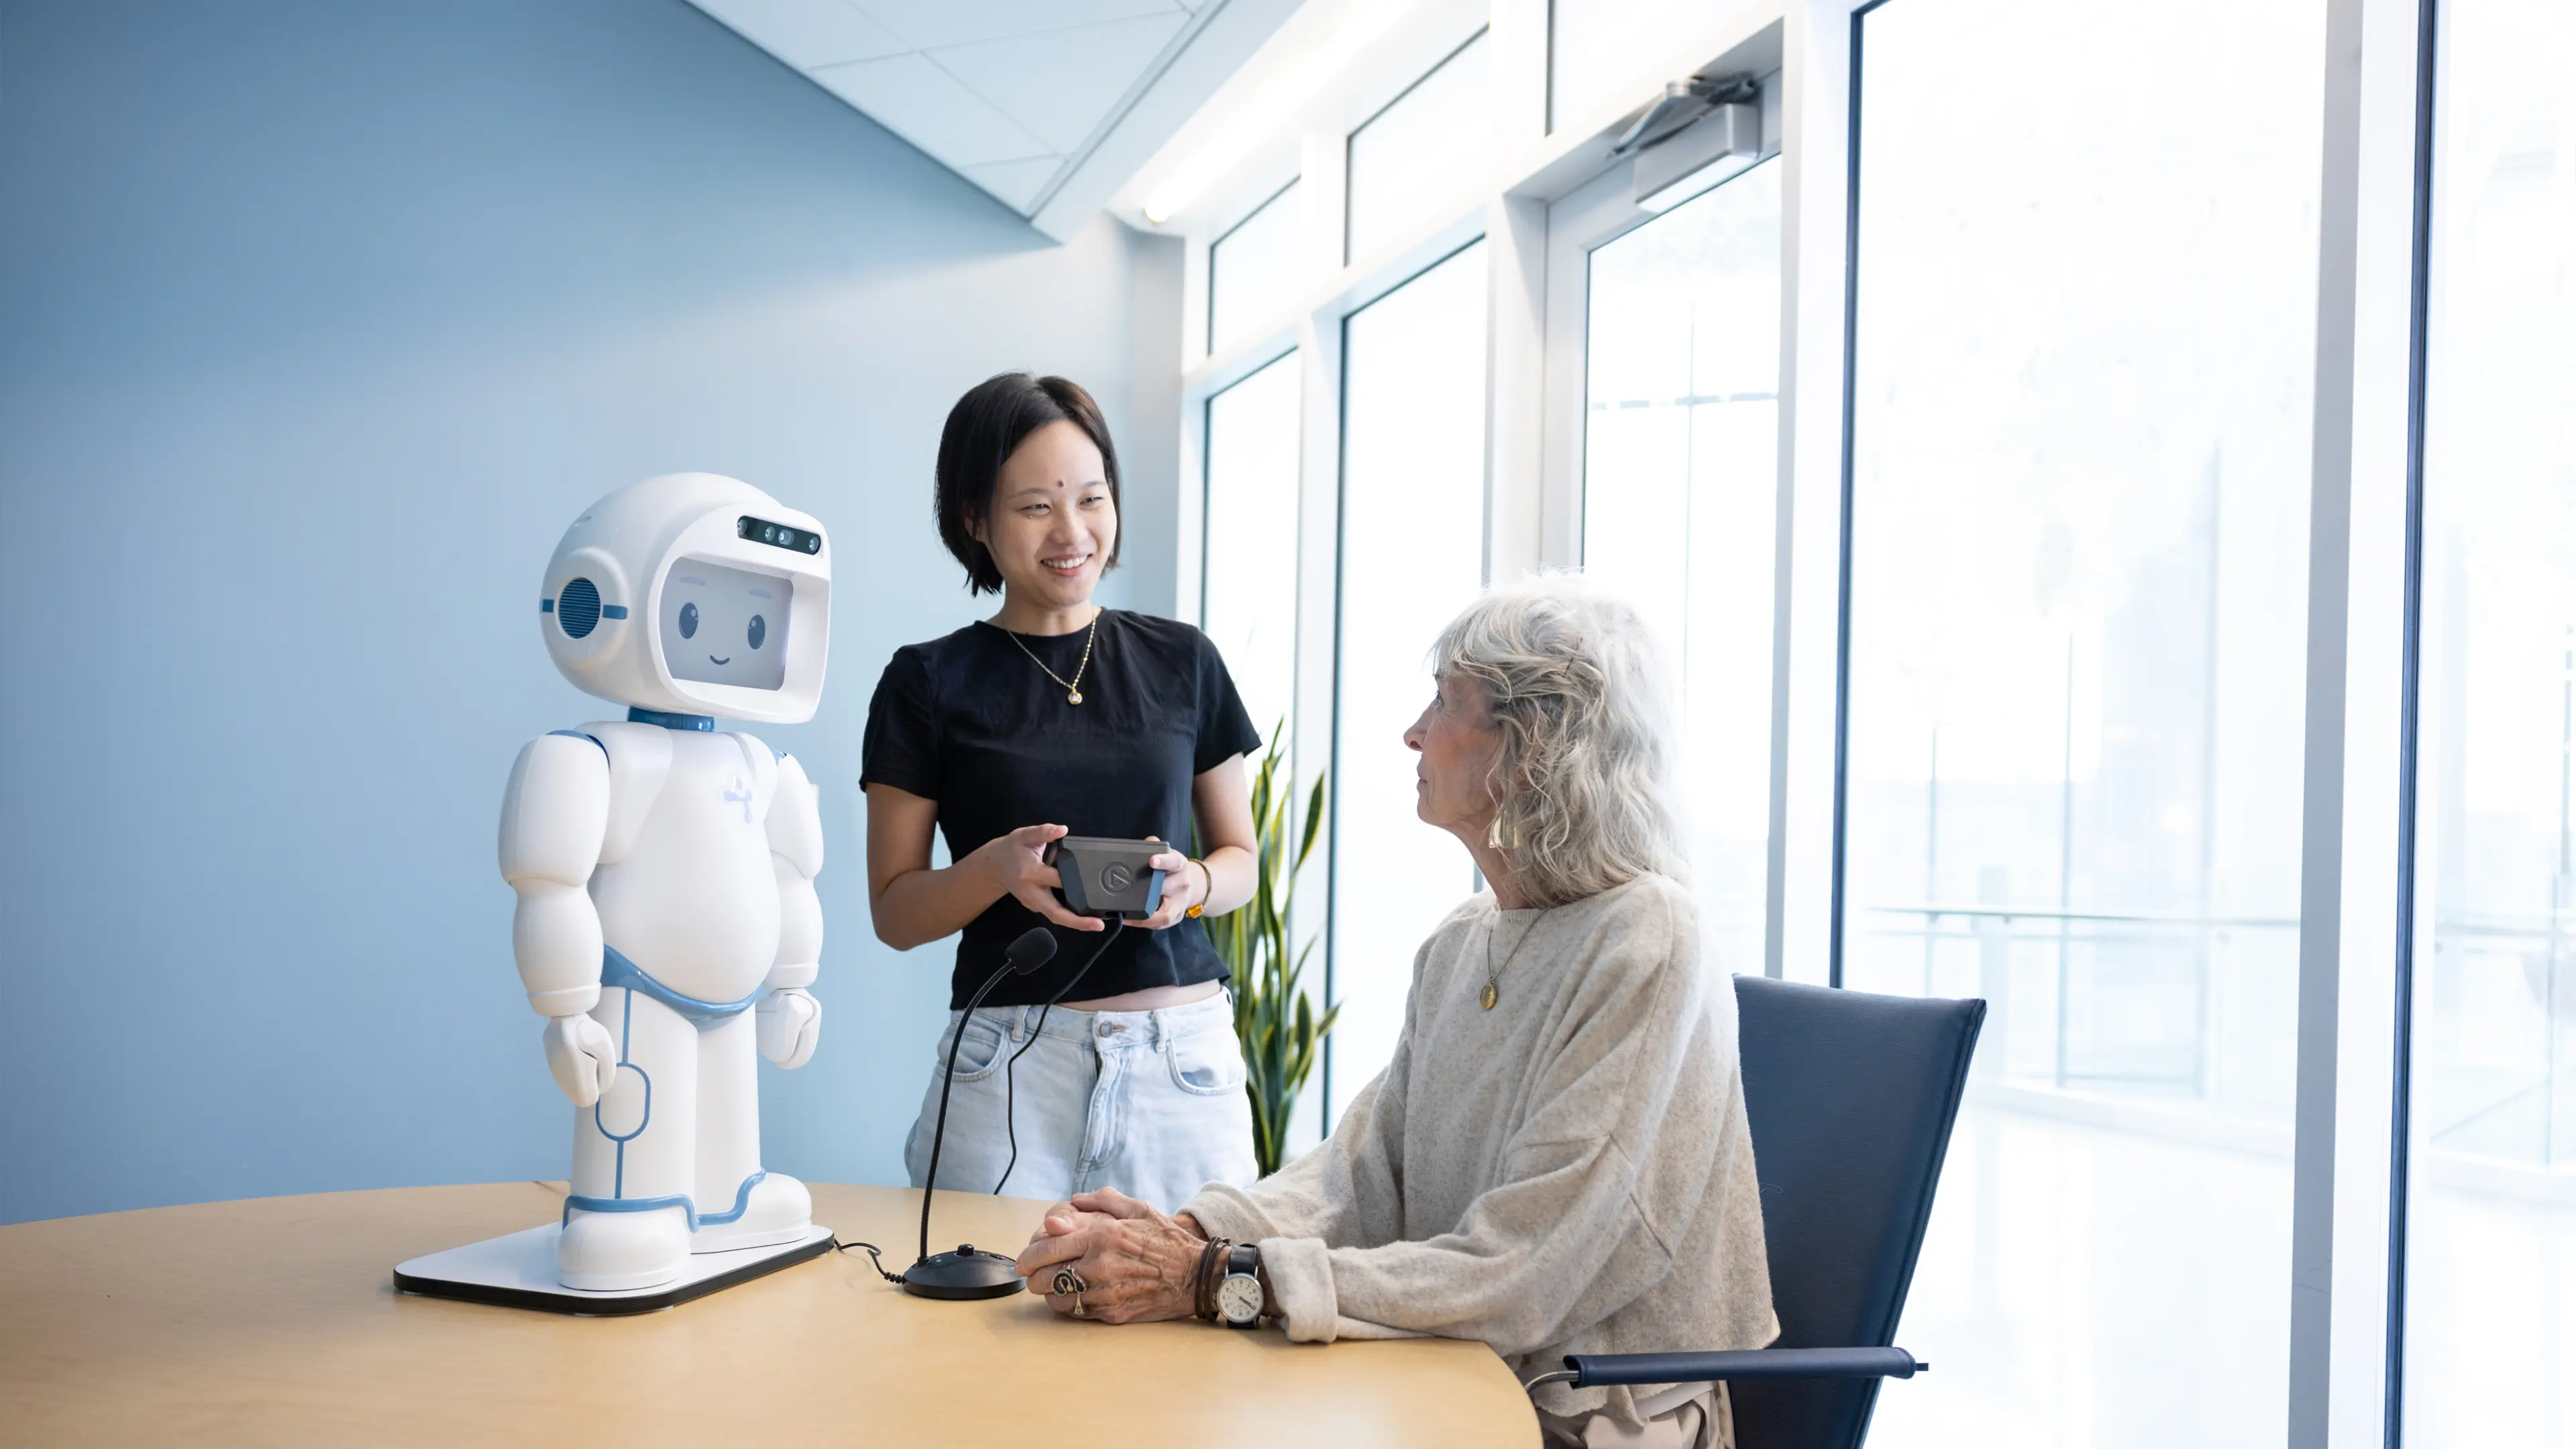 A female student stands next to a table where an older woman sits; a white robot stands on the table in front of them both.